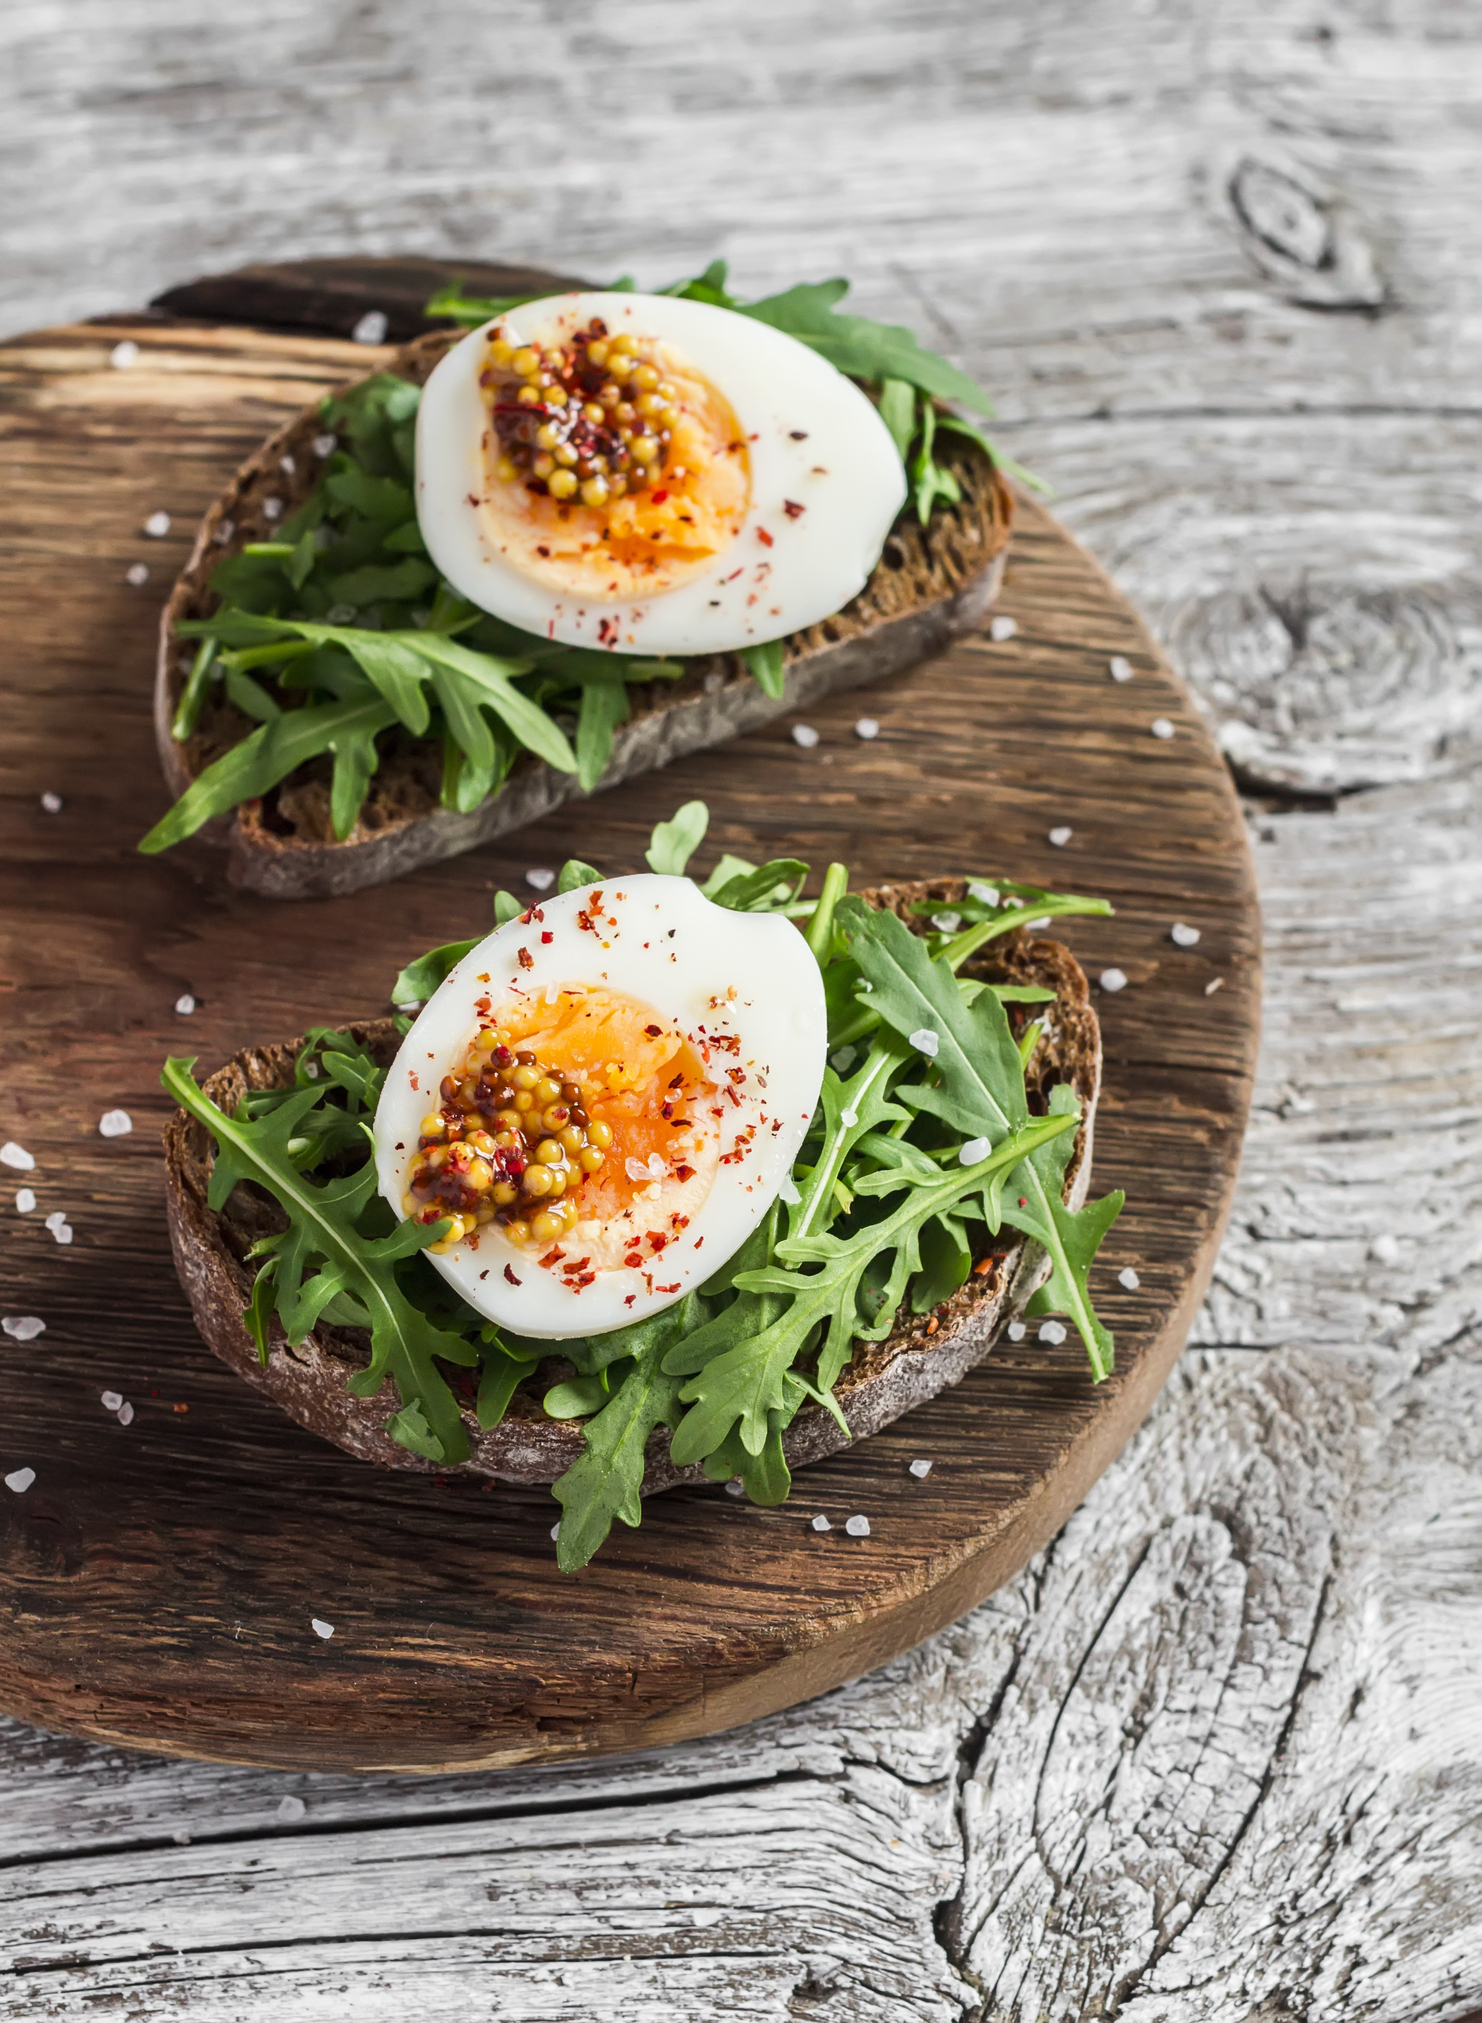 Boiled eggs can be a great addition to many different dishes. 